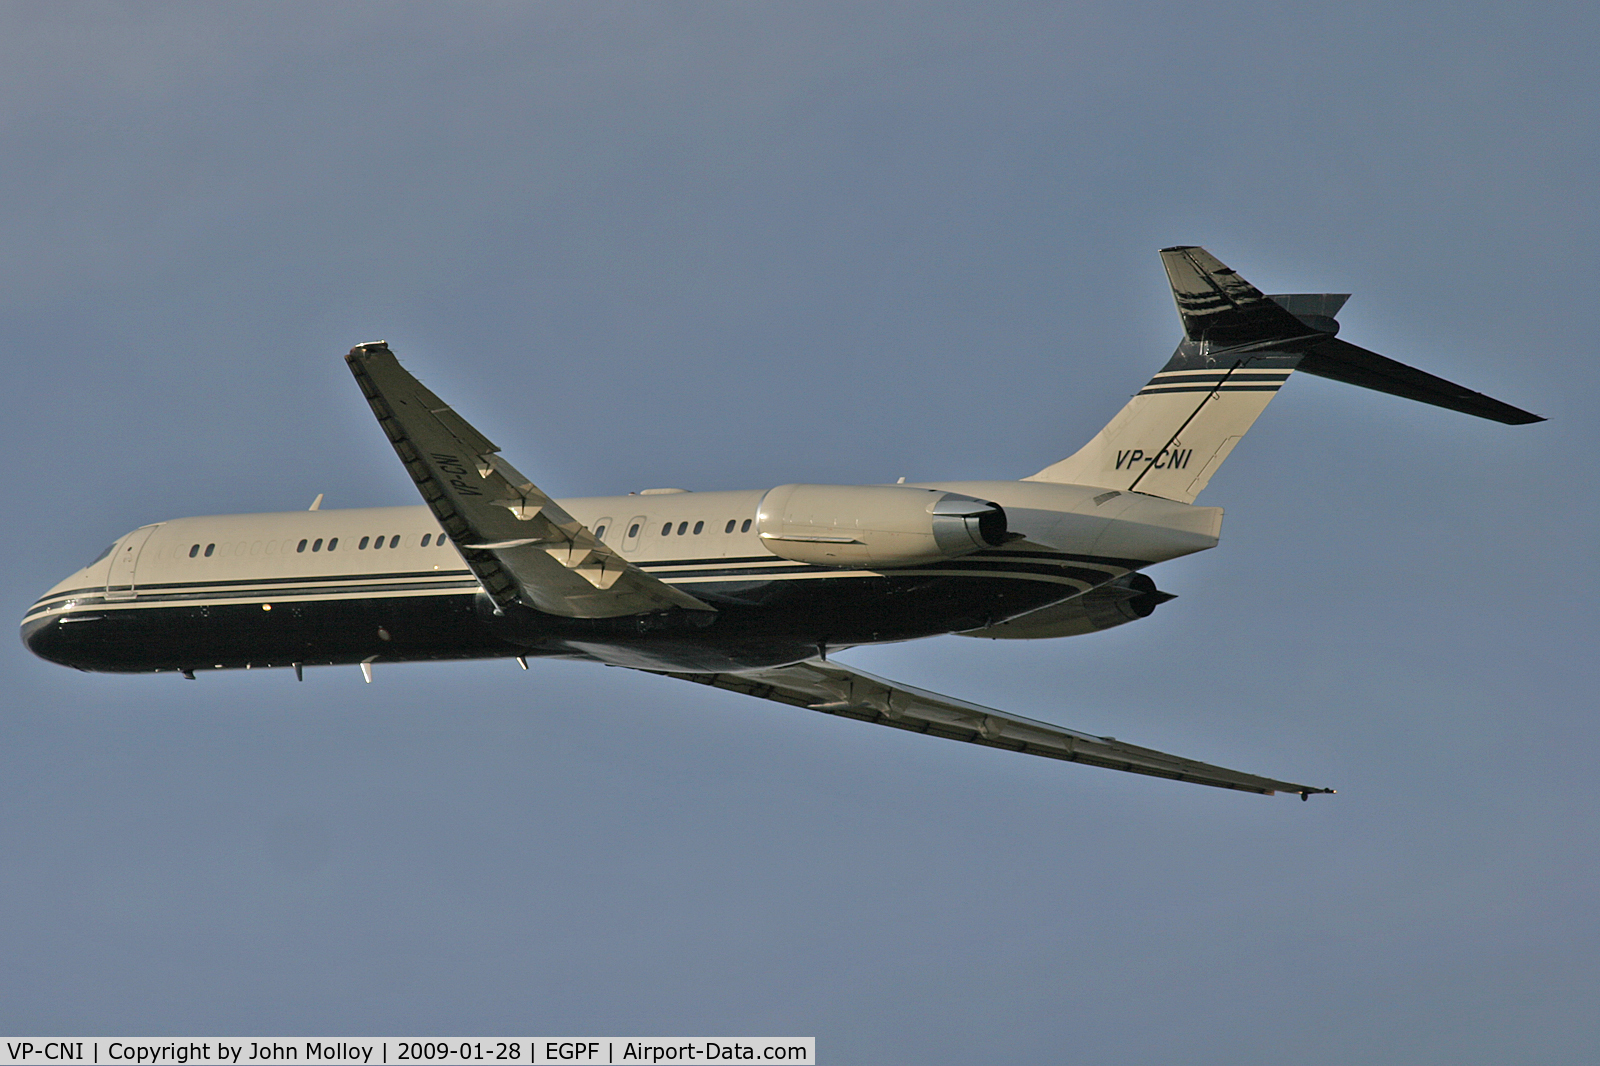 VP-CNI, 1989 McDonnell Douglas MD-87 (DC-9-87) C/N 49767, Departing Glasgow at 2130 hrs.